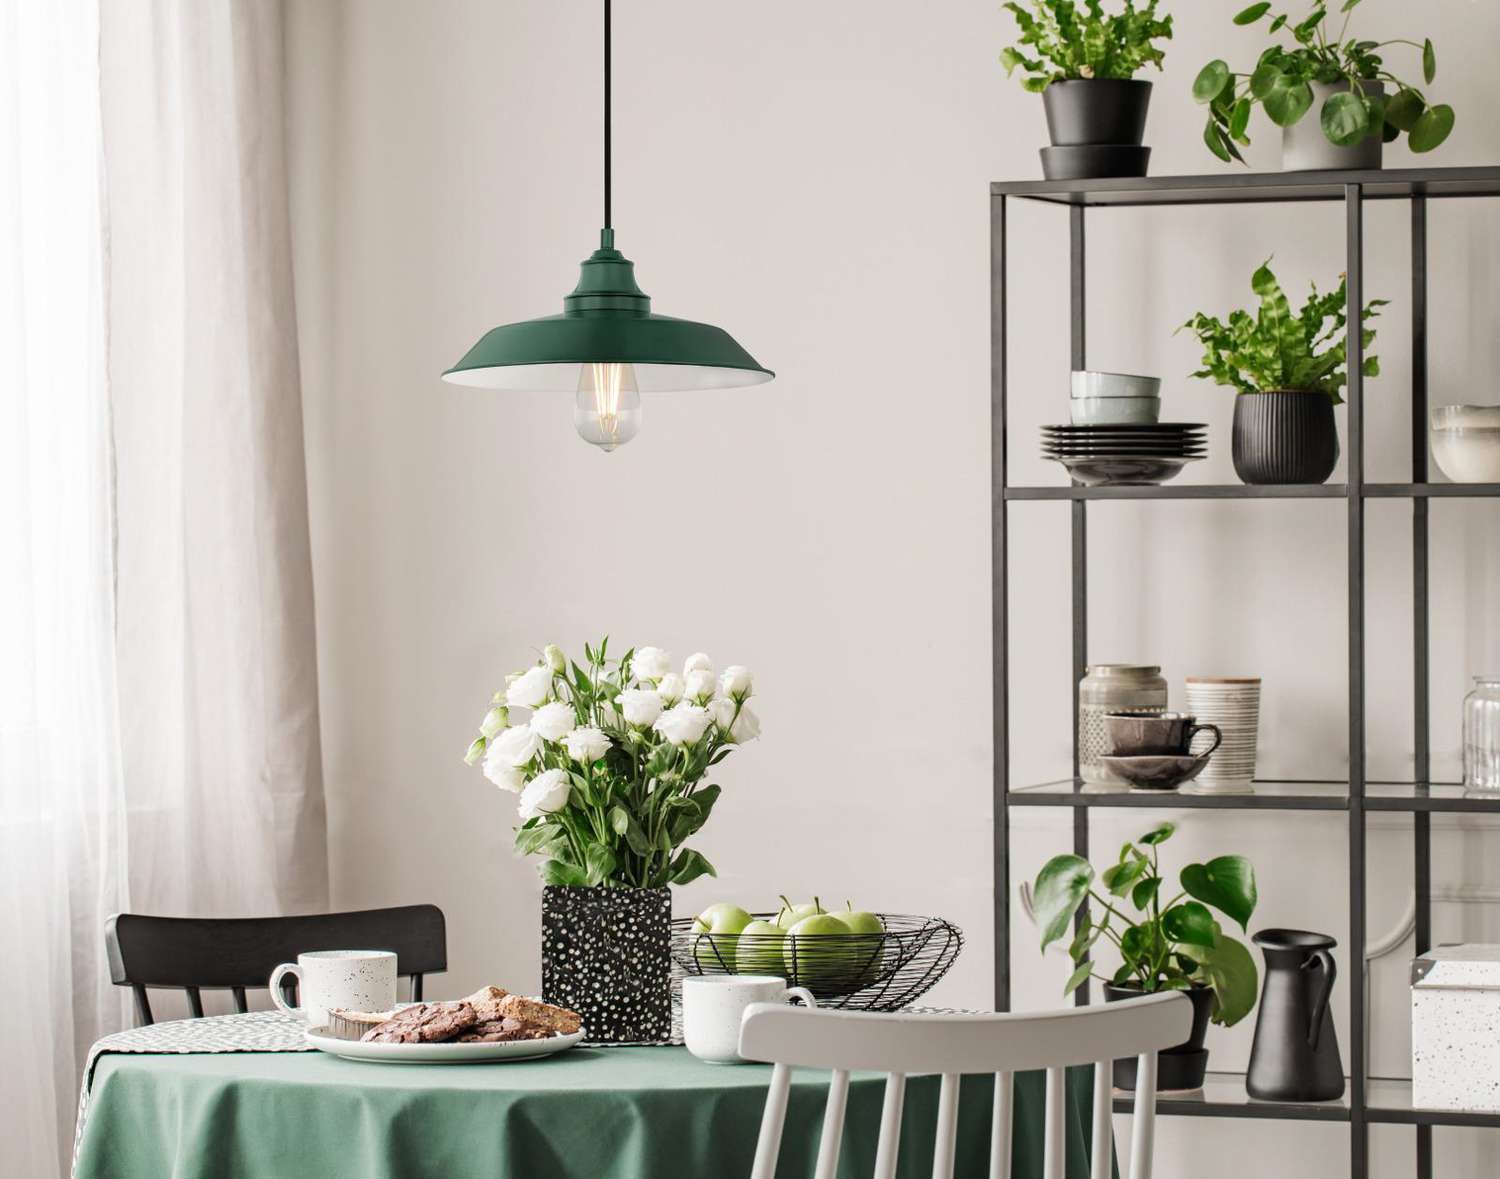 green and white dining area with hanging light